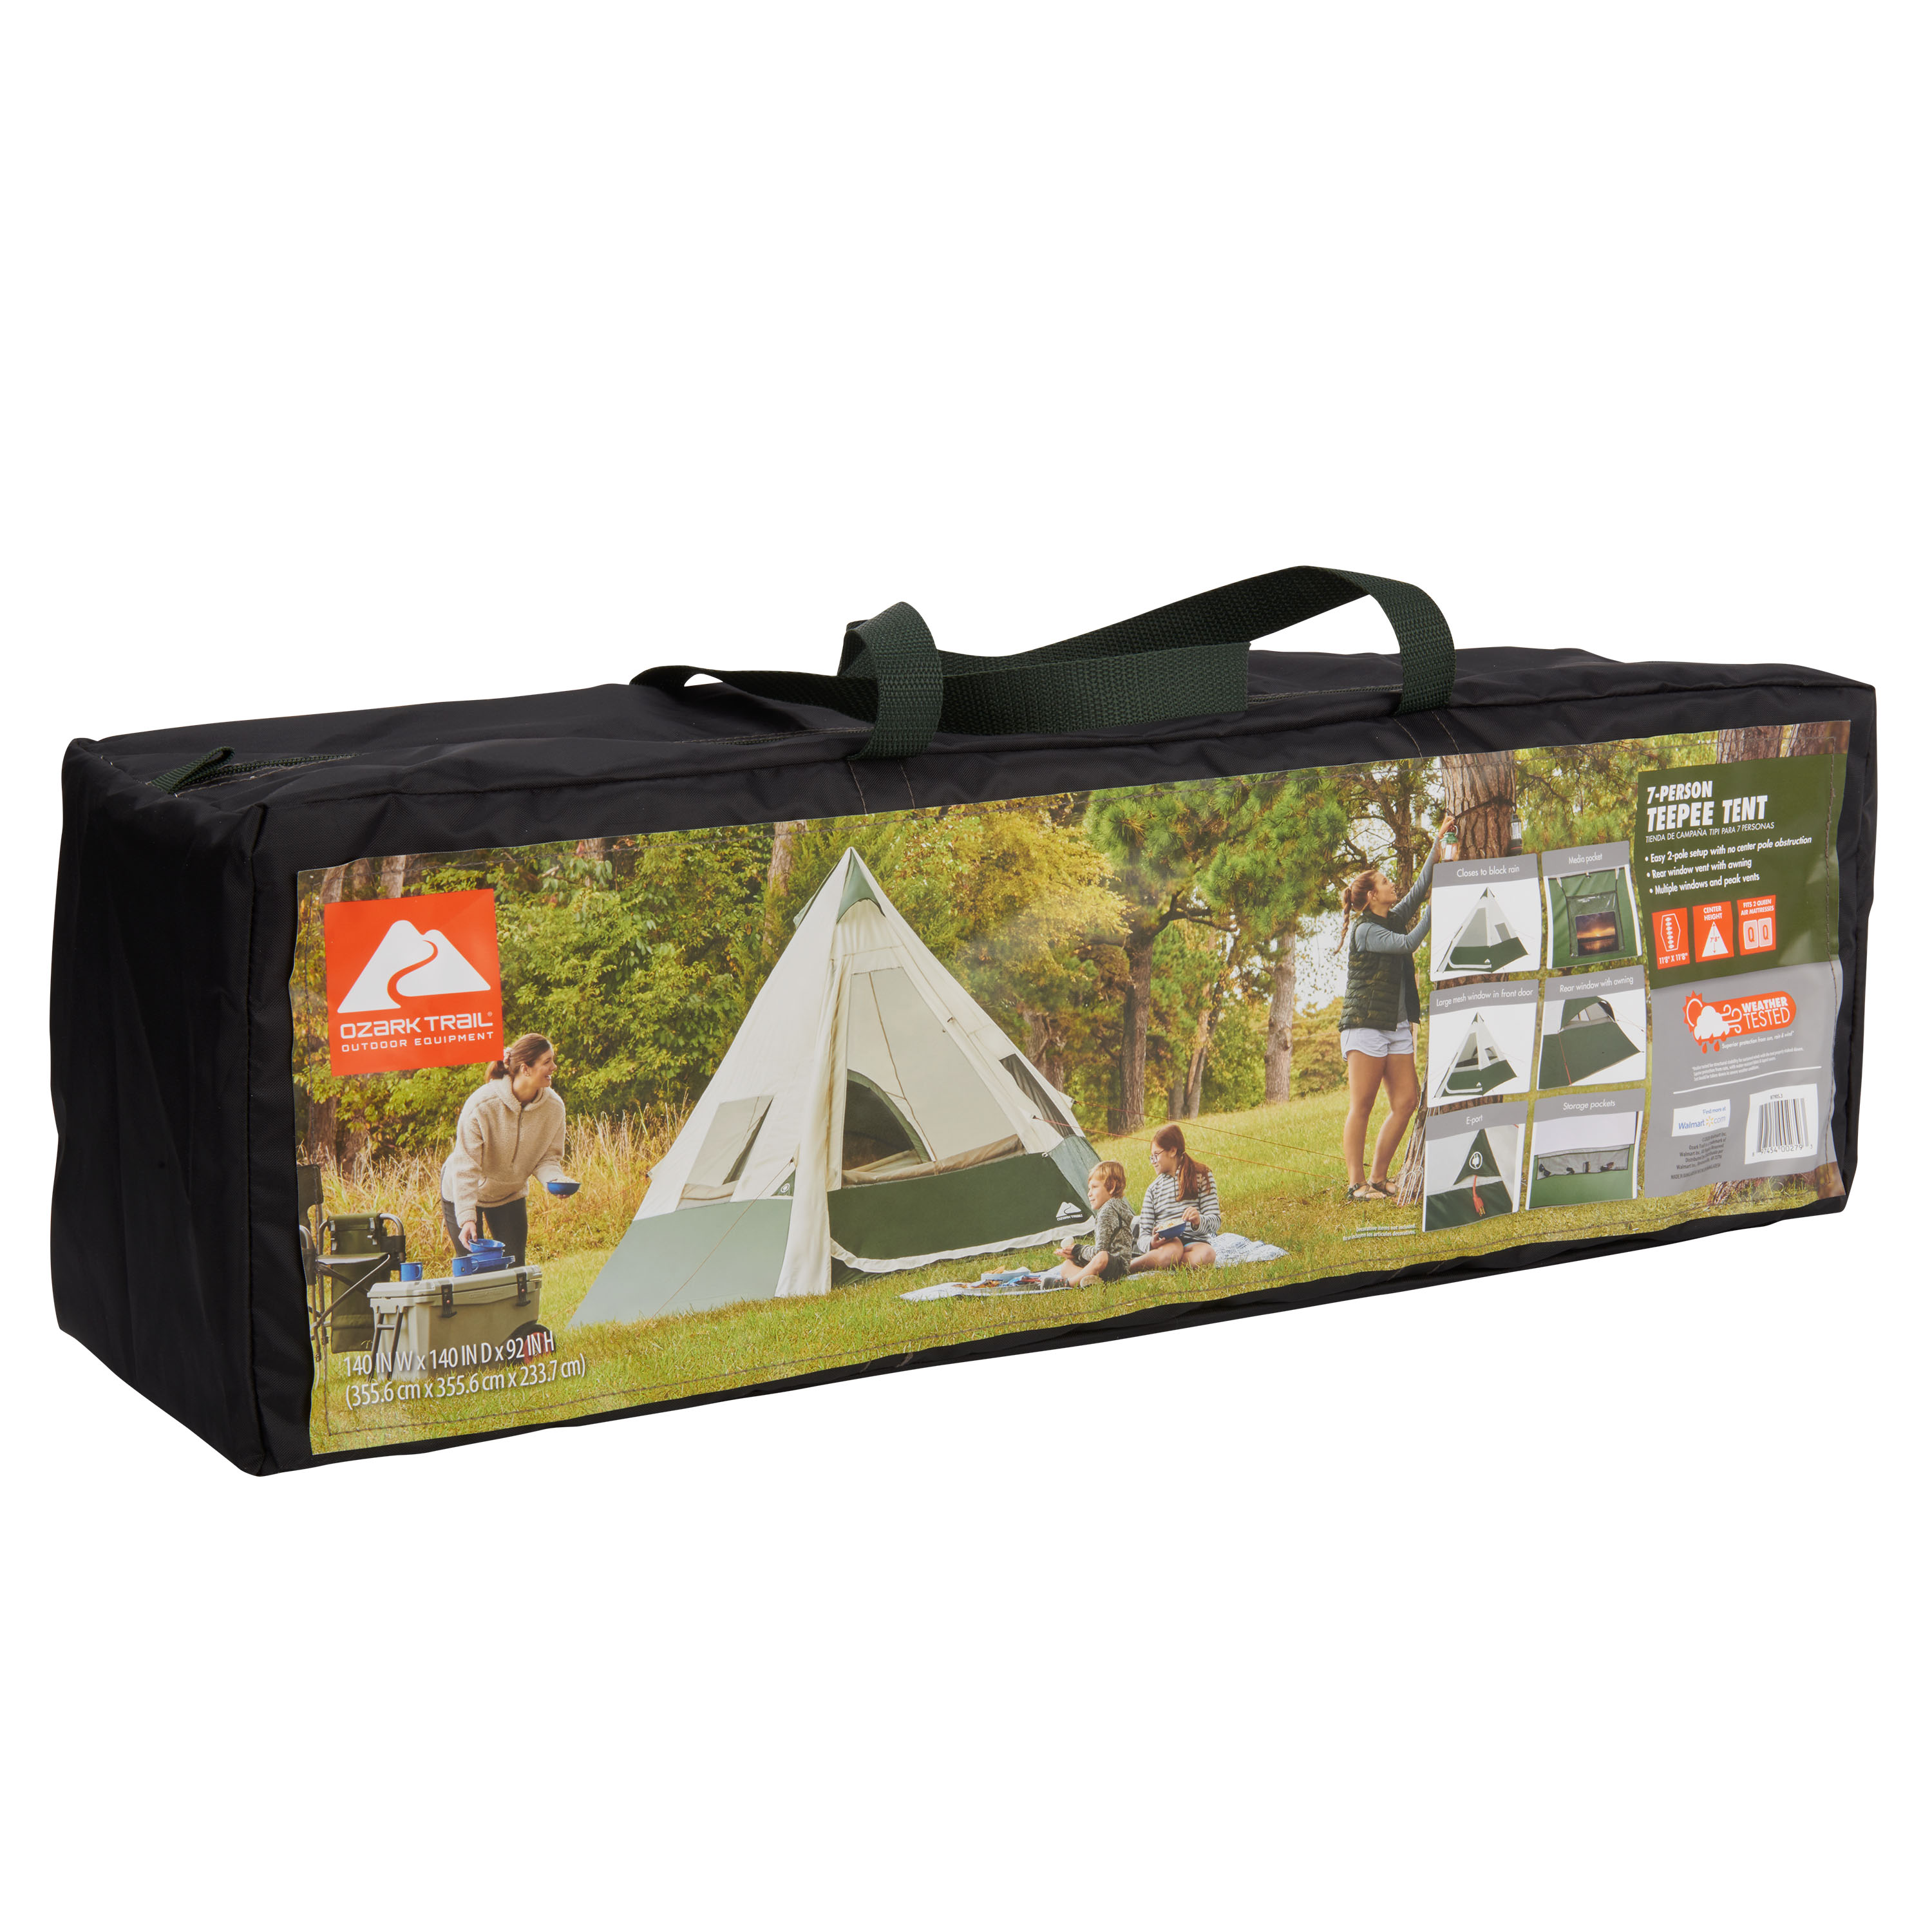 Ozark Trail 7-Person 1-Room Teepee Tent, with Vented Rear Window, Green - image 3 of 12